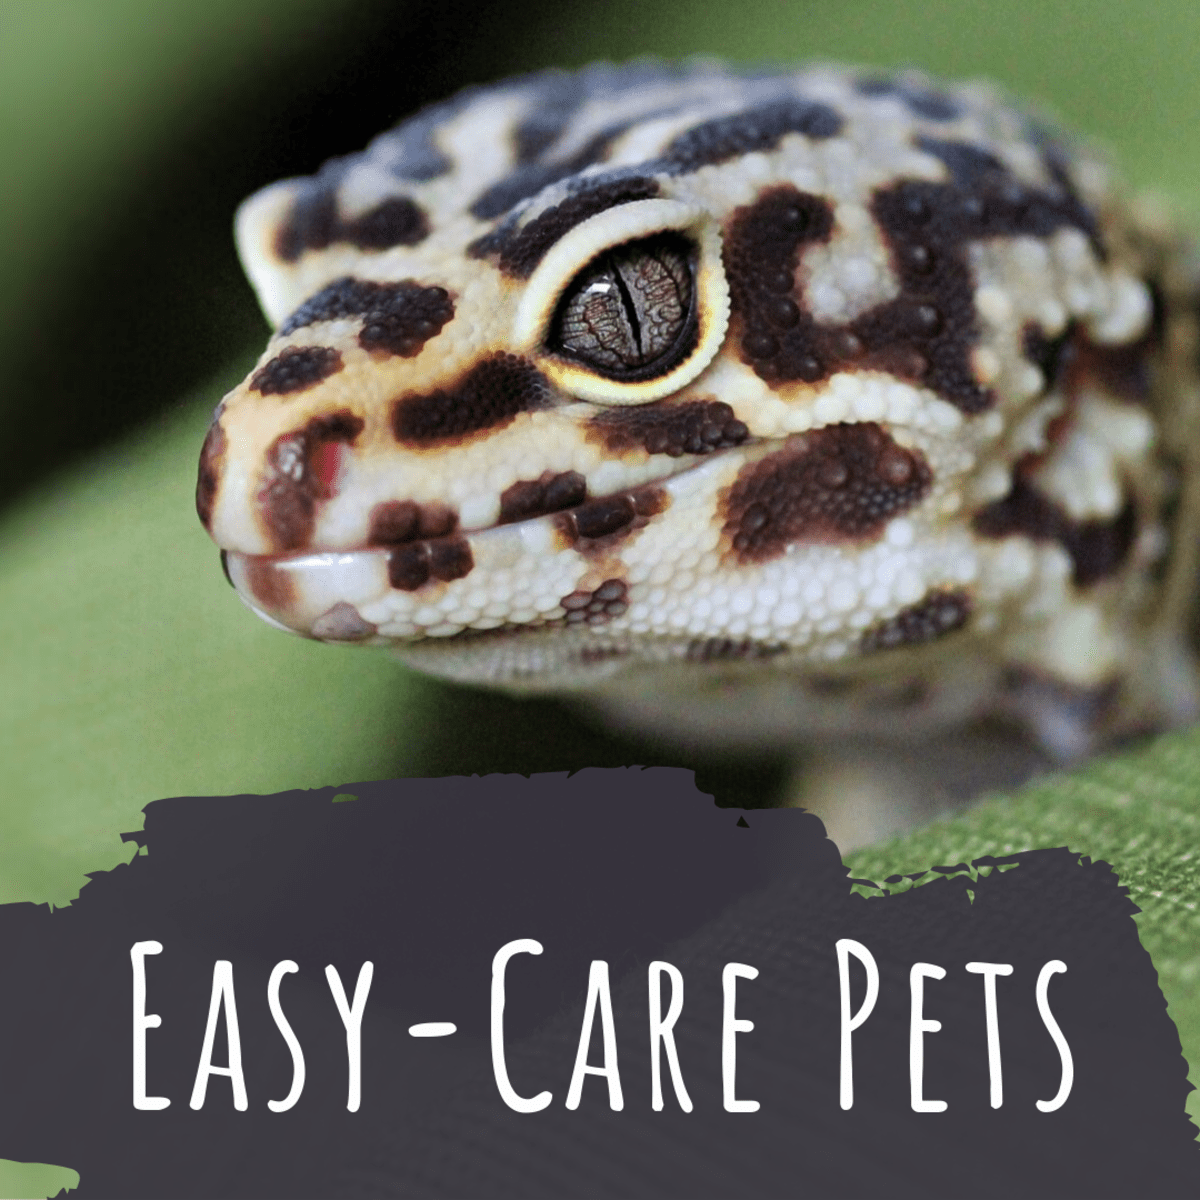 10 Pets That Are Easy to Take Care Of - PetHelpful